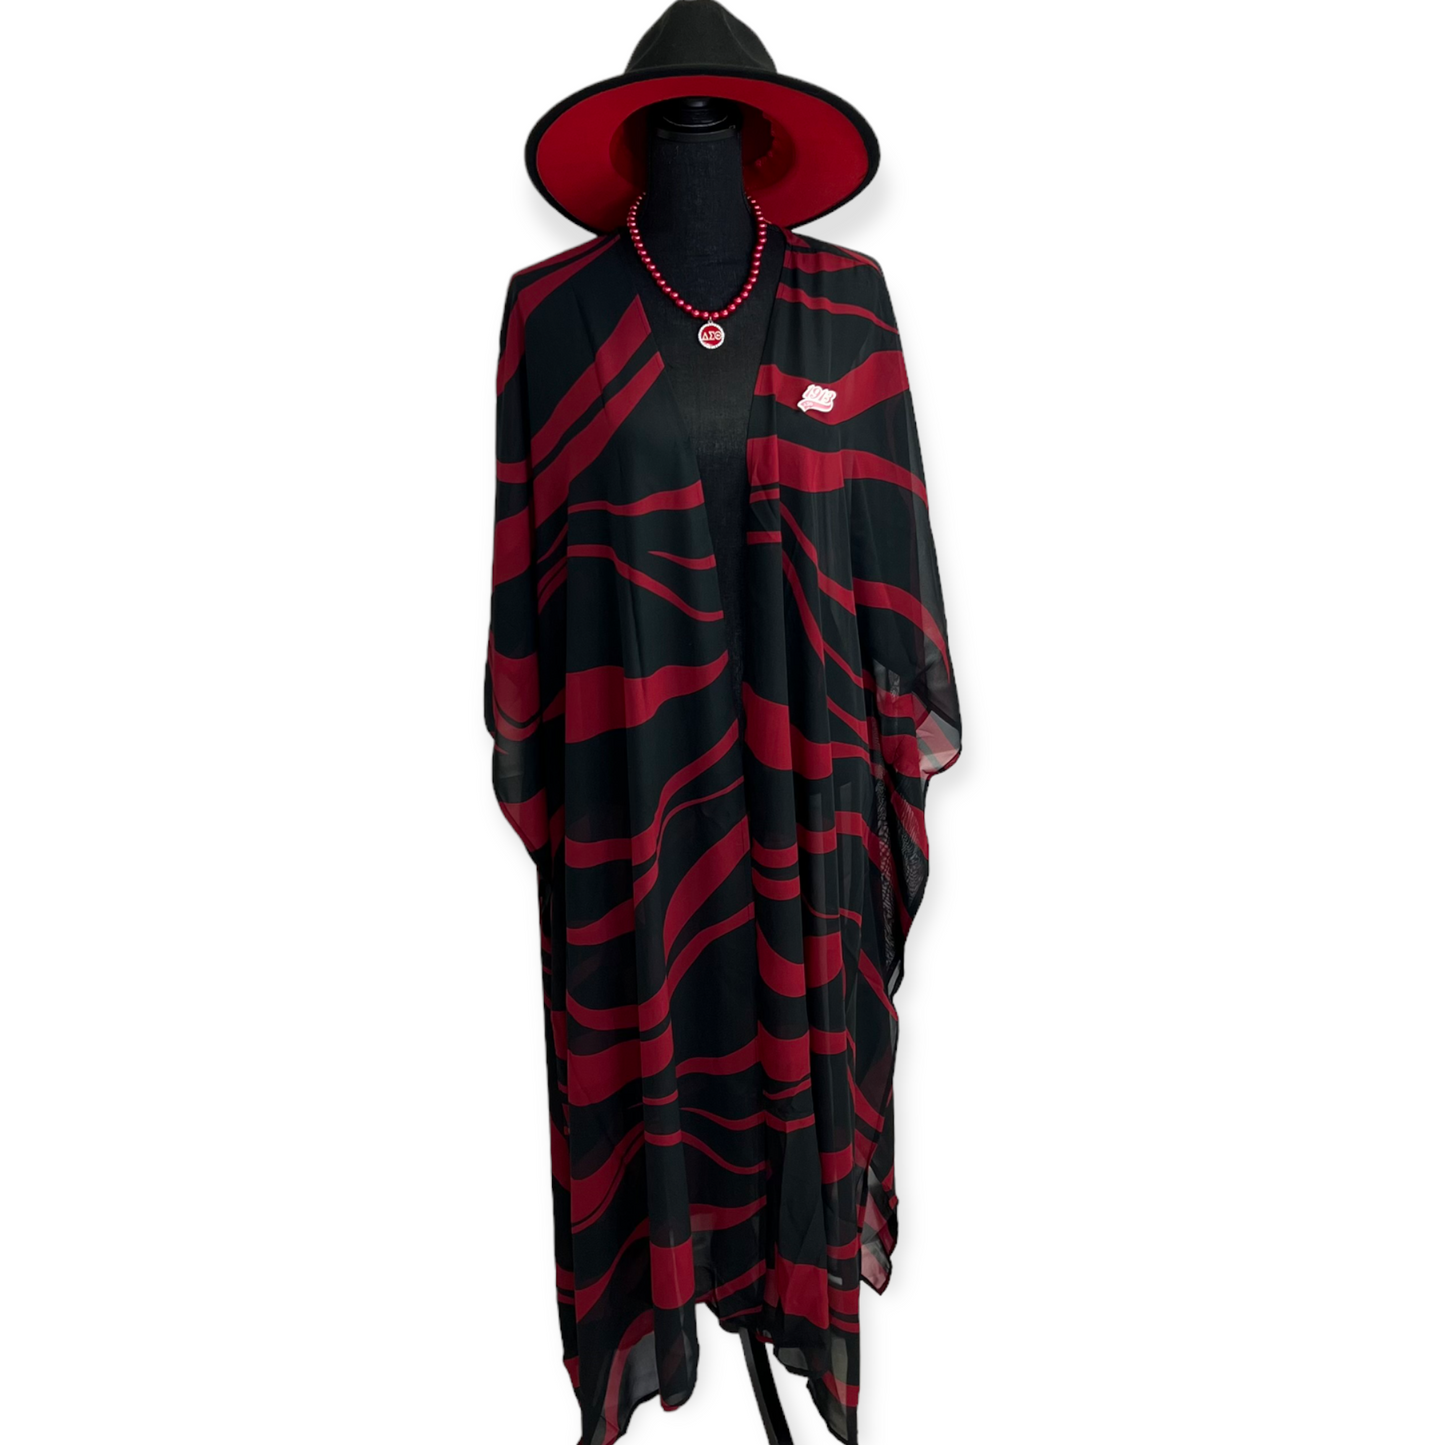 R- Red and Black Zebra Print Cardigan - Changing Room Boutique